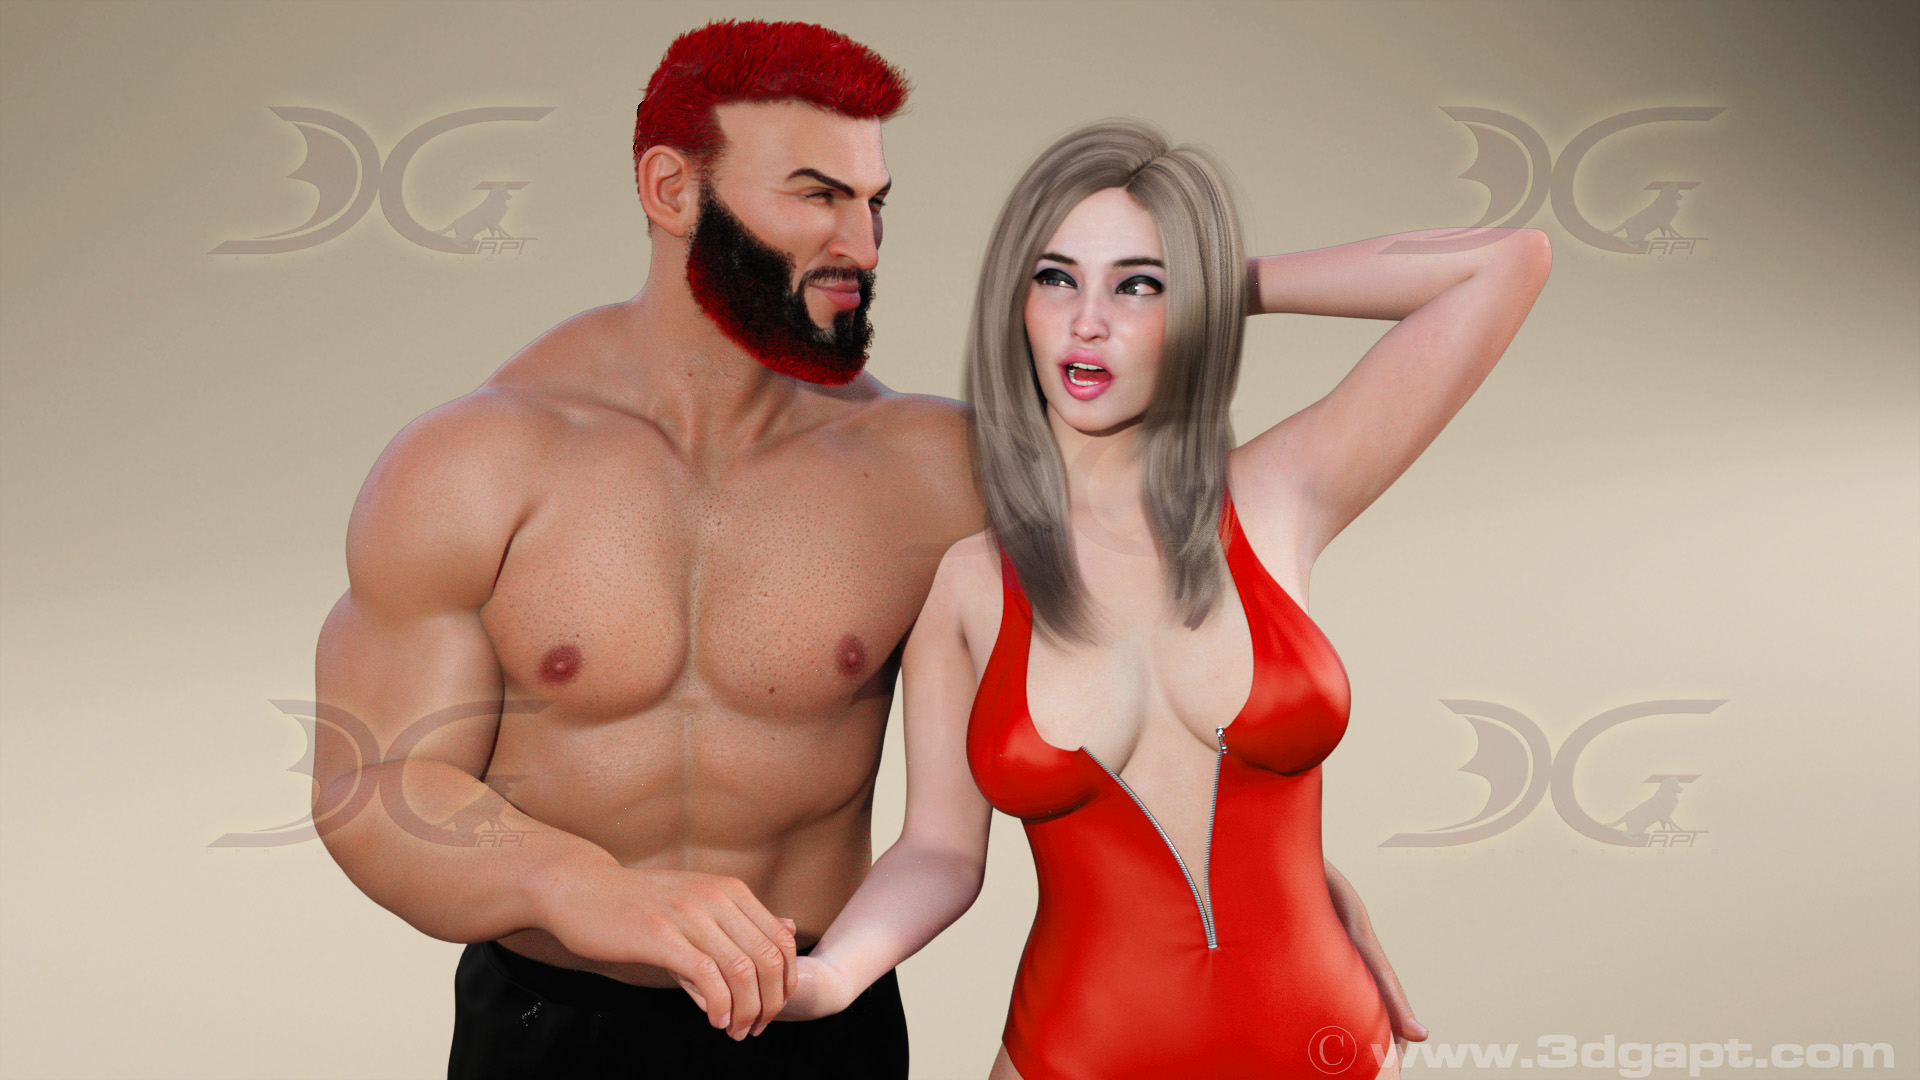 3d Characters man-woman images for book cover5